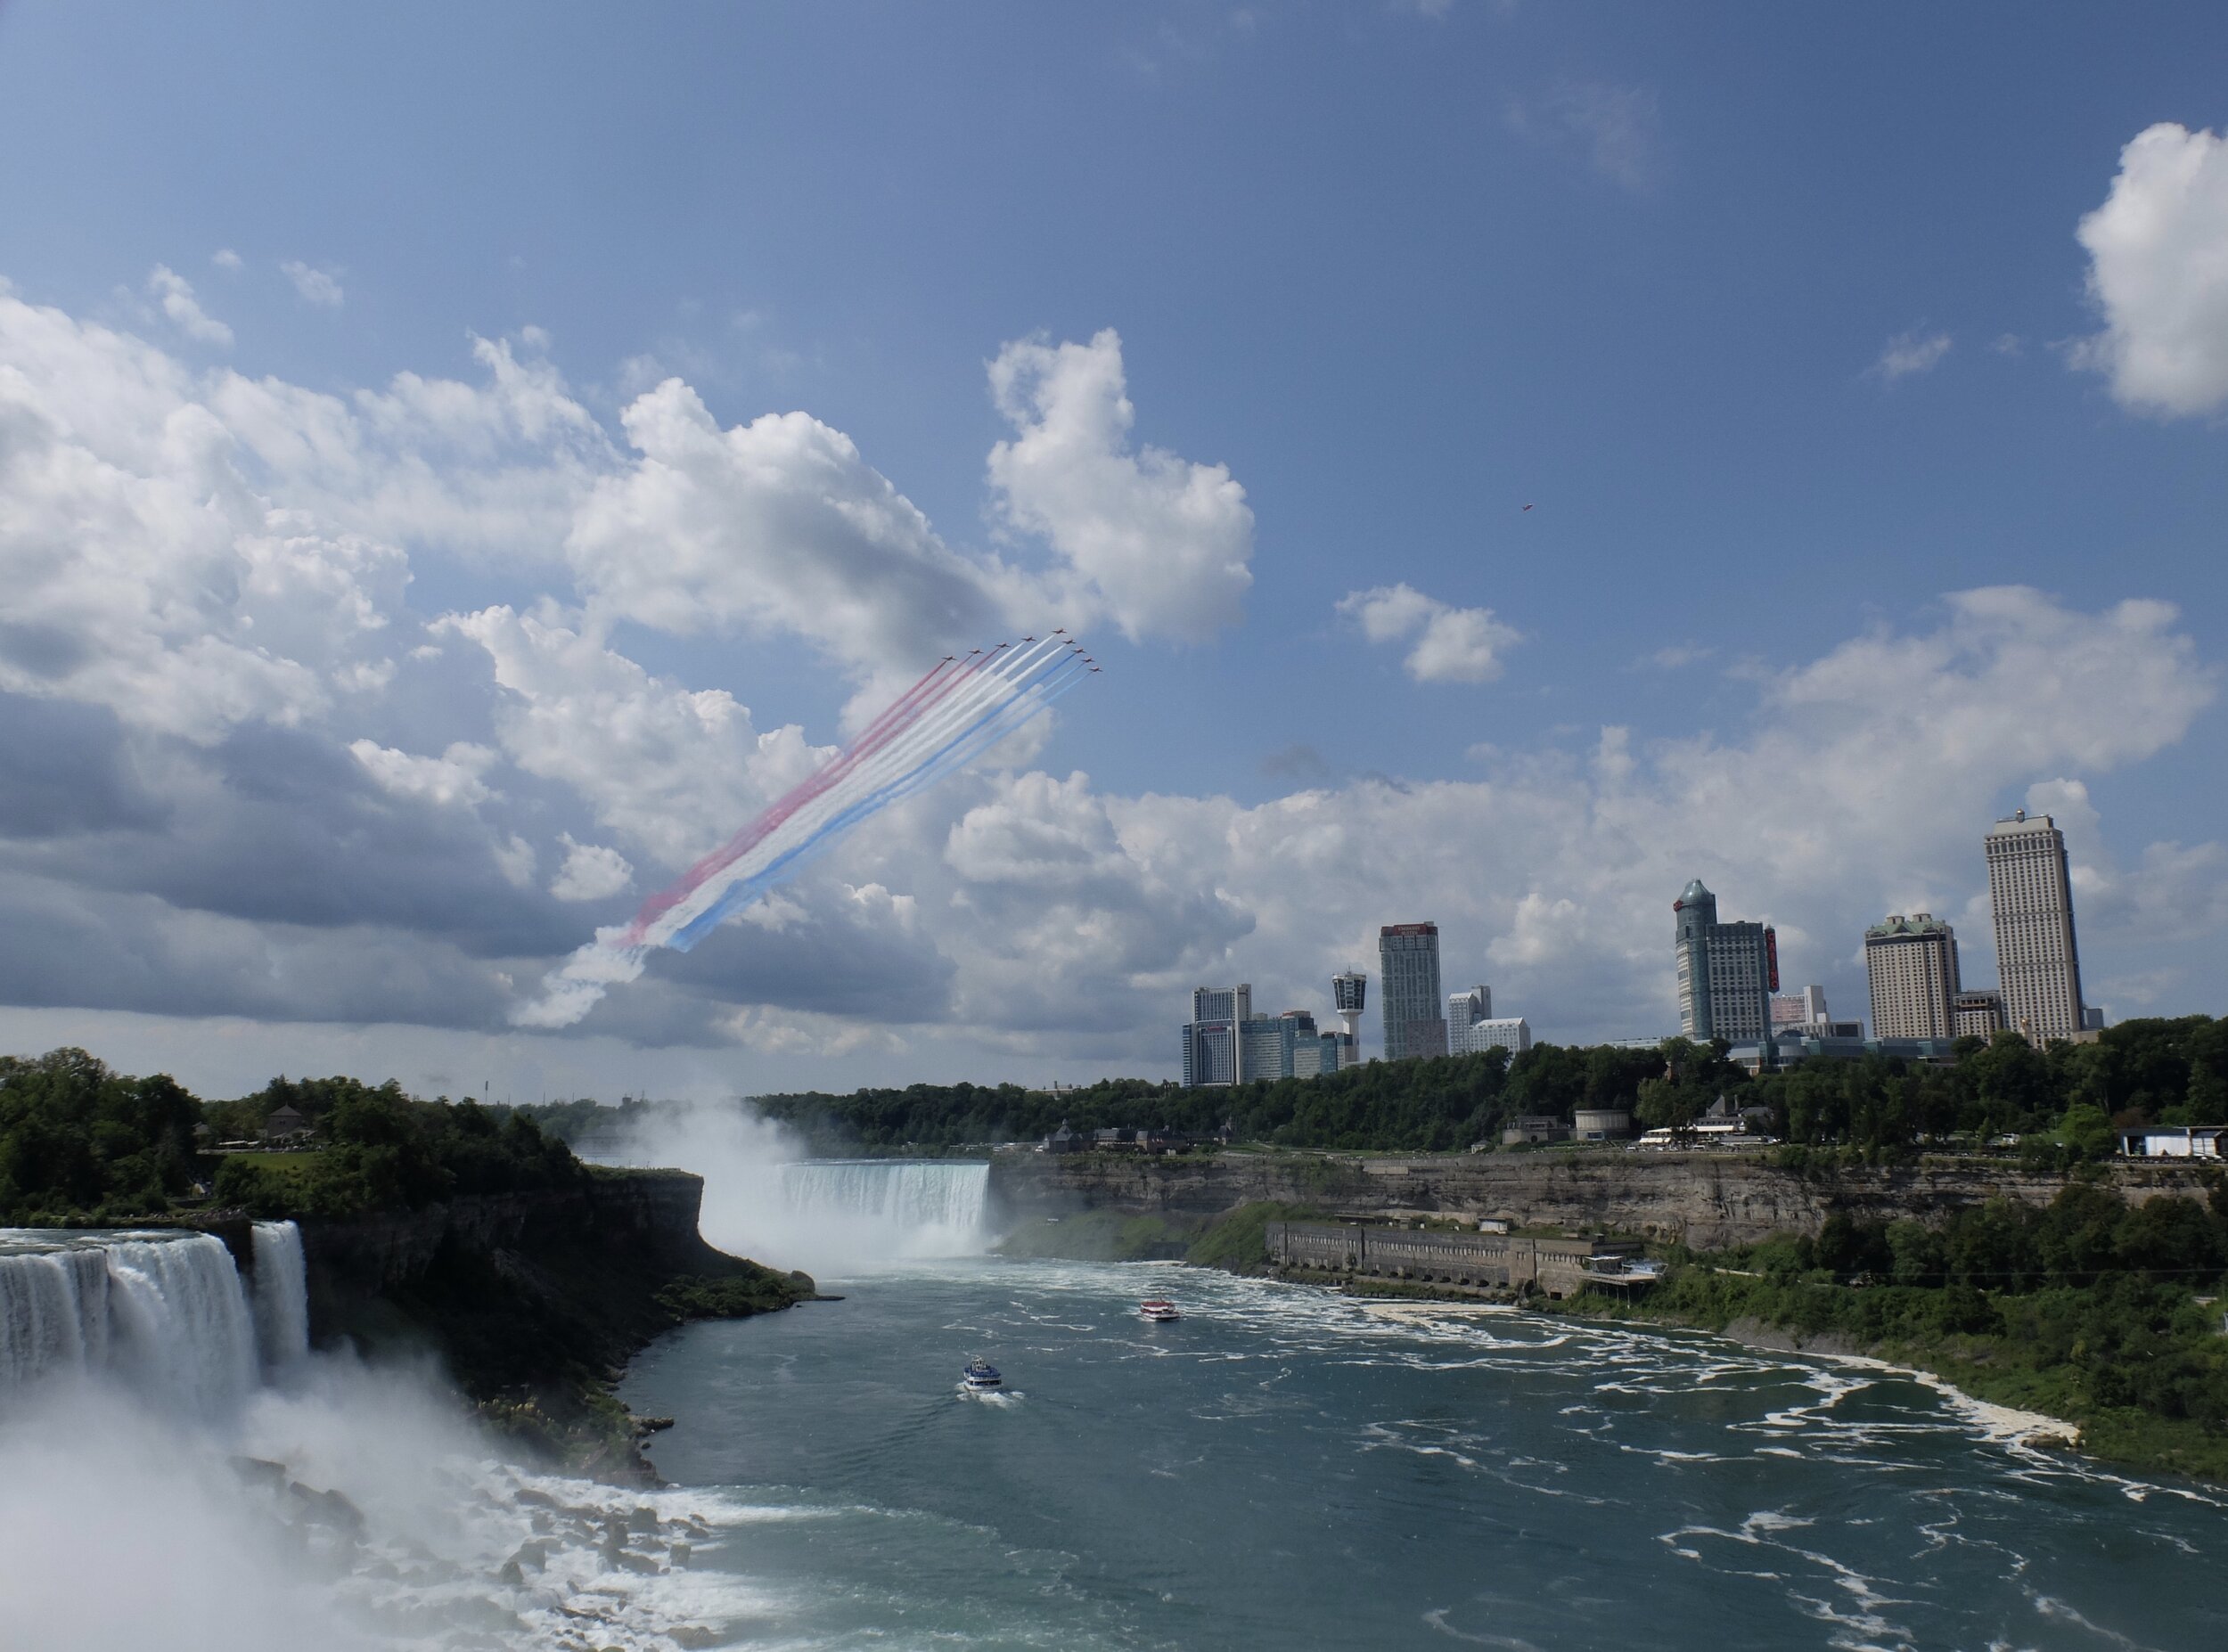 We were on the observation platform when we noticed this spectacle appearing.  It was the British RAF Red Arrows 2019 North American Tour.